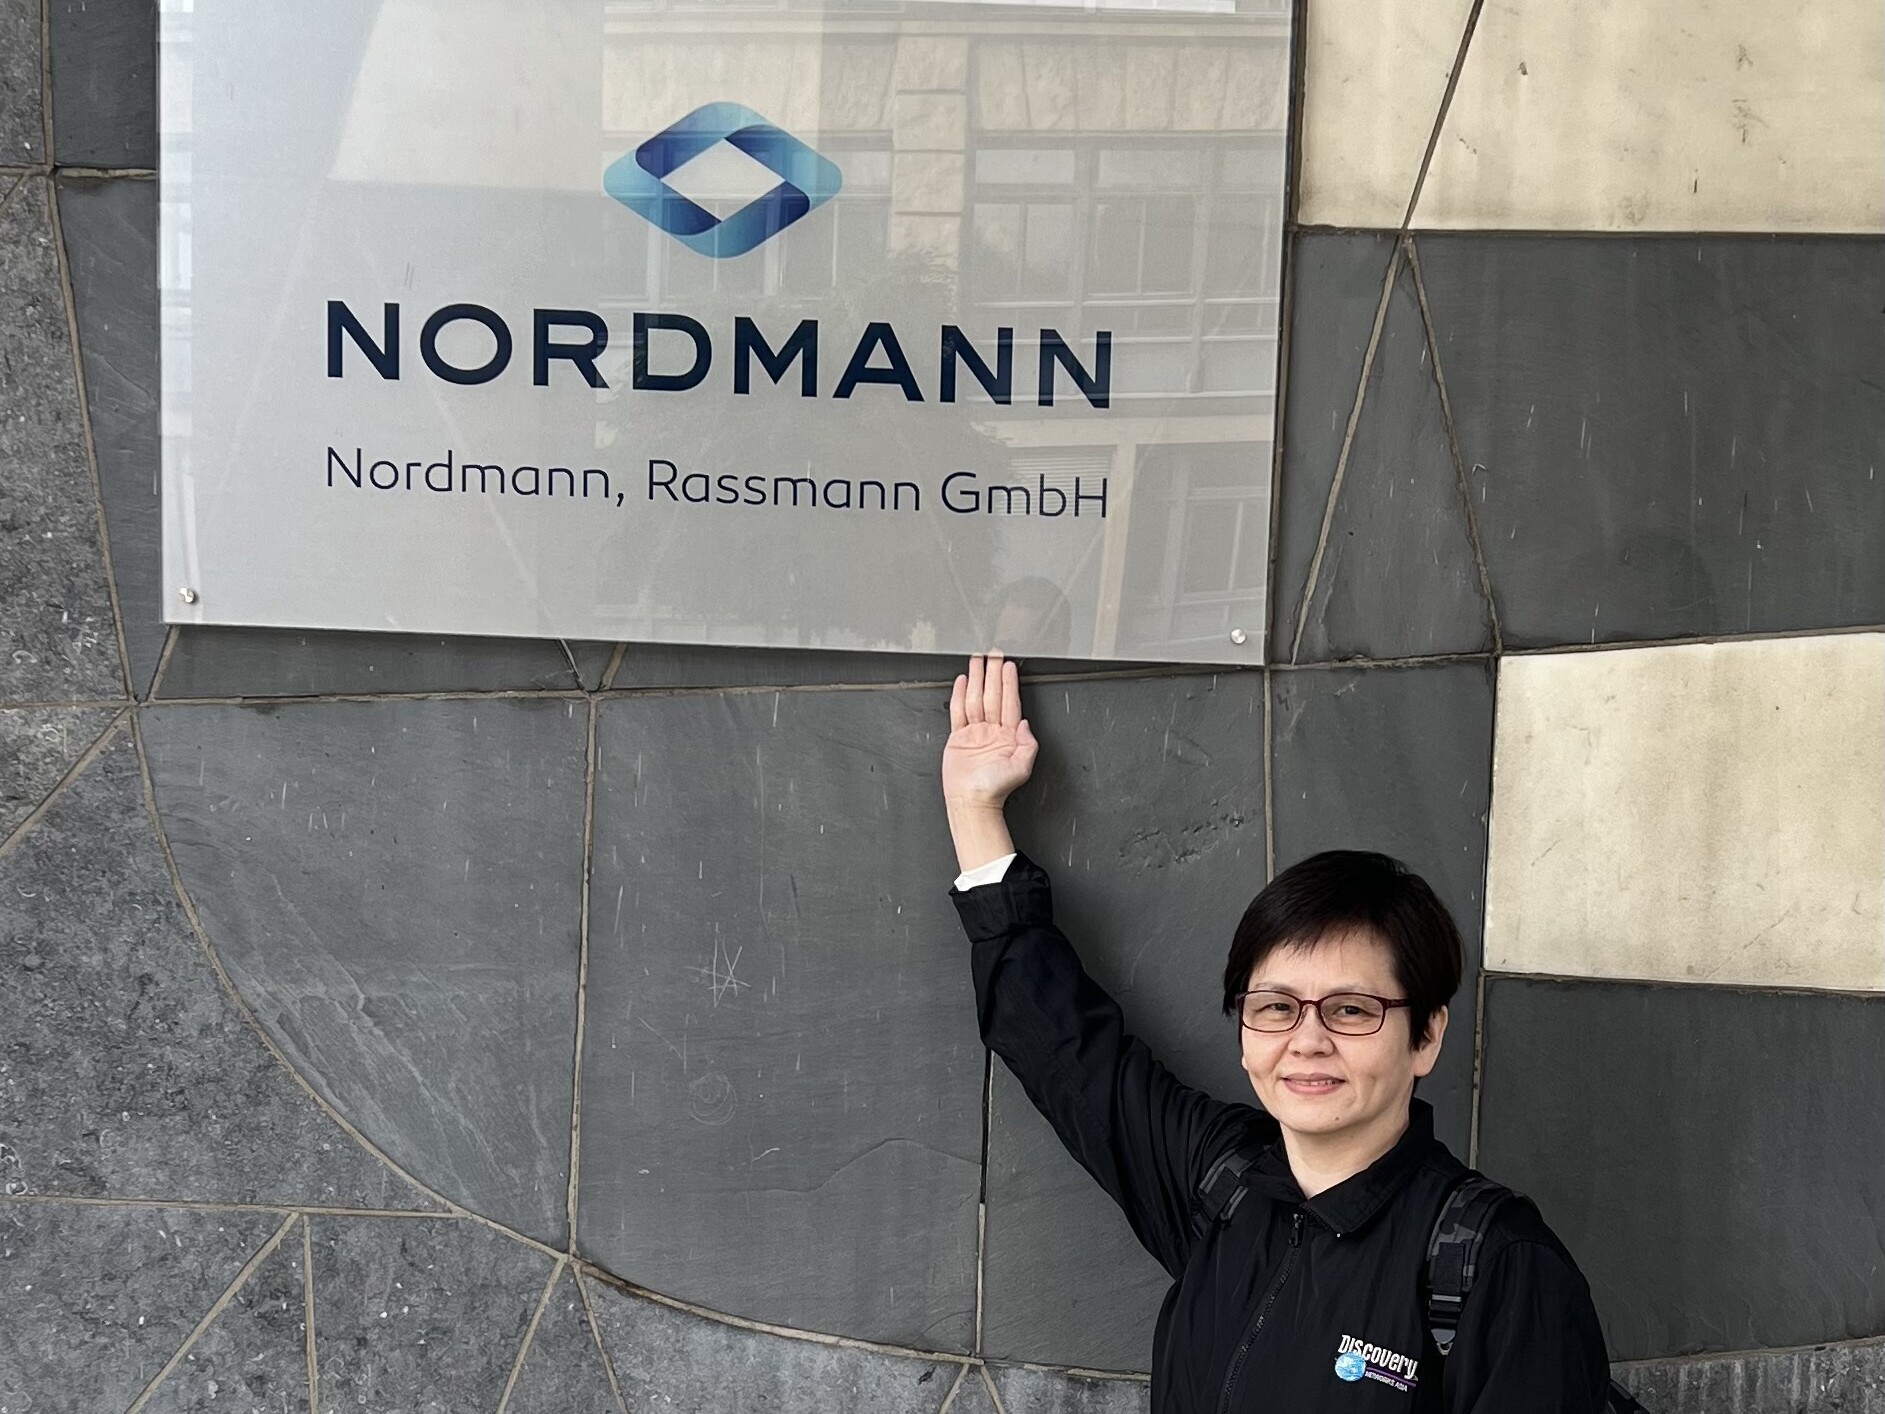 woman points at the Nordmann logo, Jacklyn Yeo